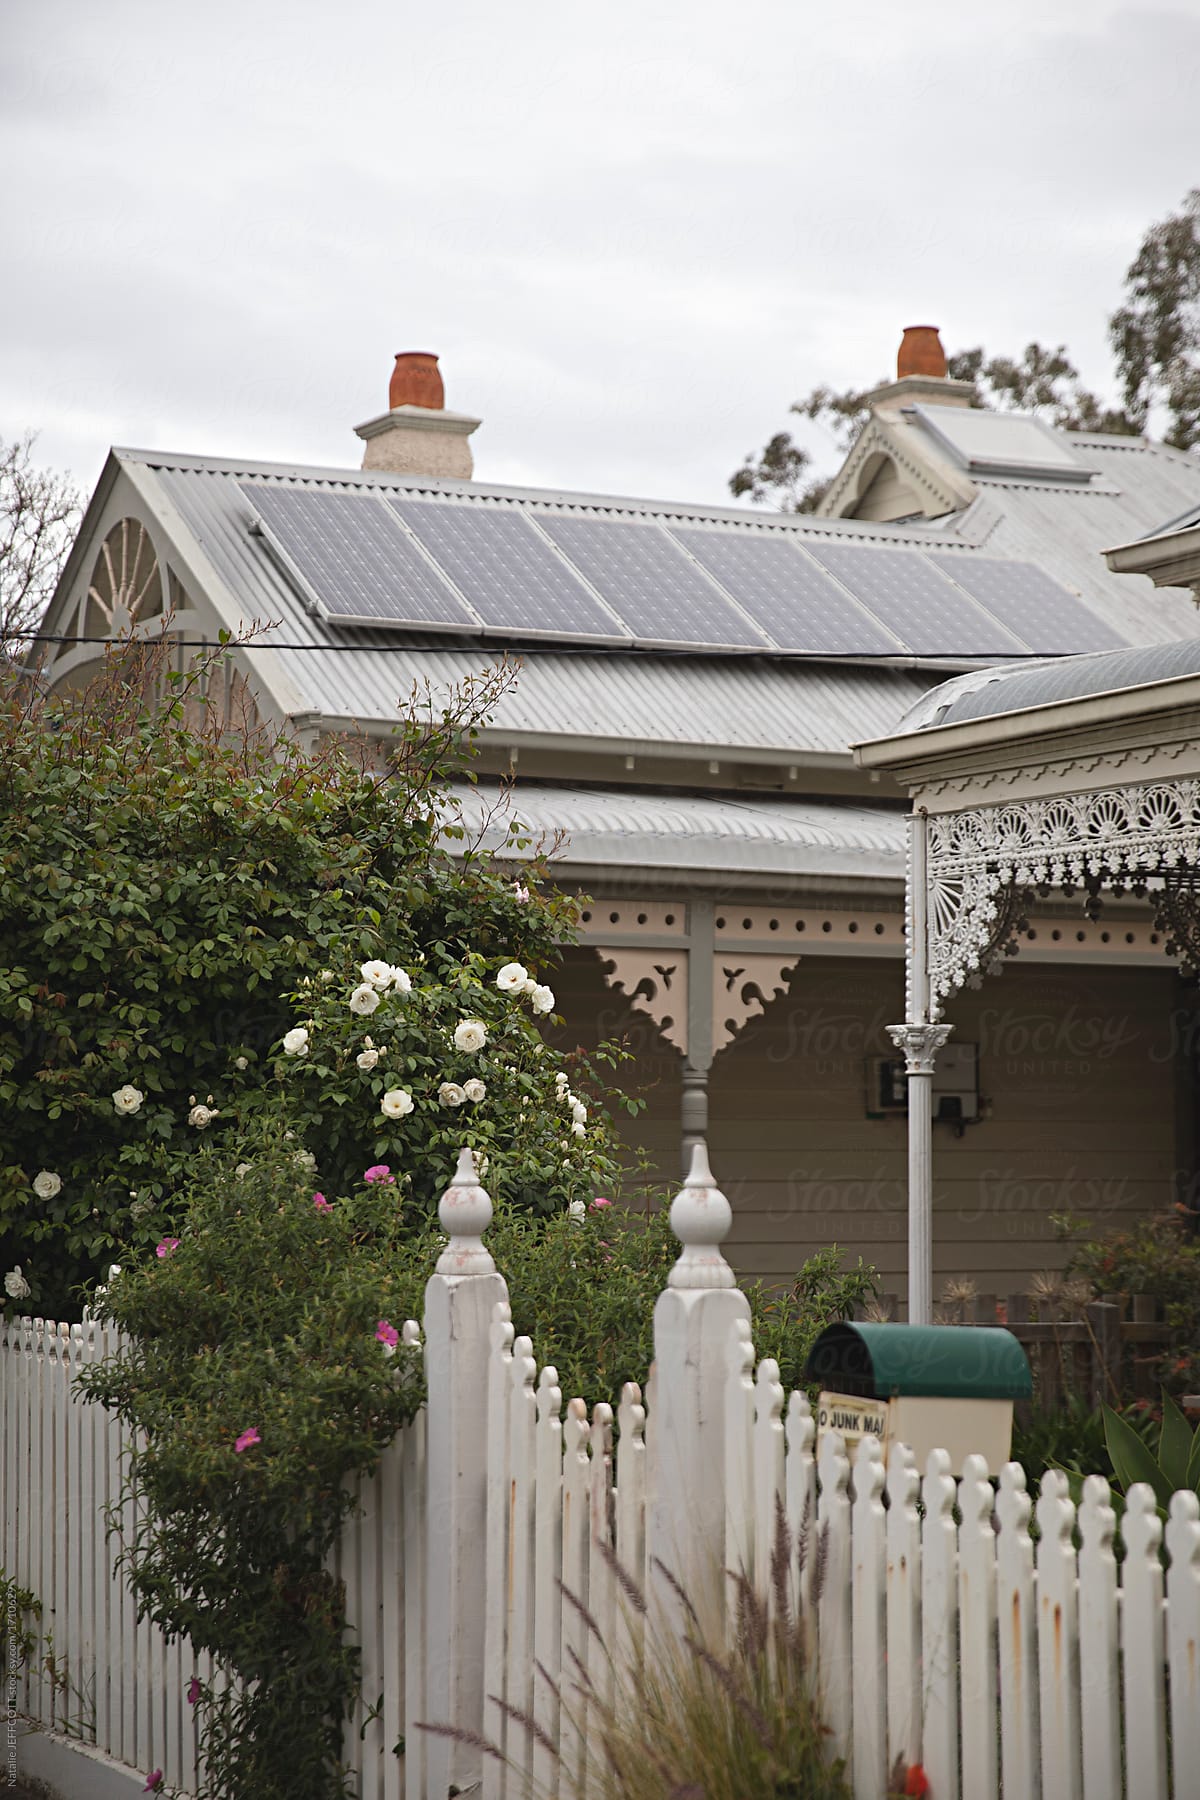 Inner-city Melbourne Australia homes with solar roof panels - renewable energy on a cloudy day